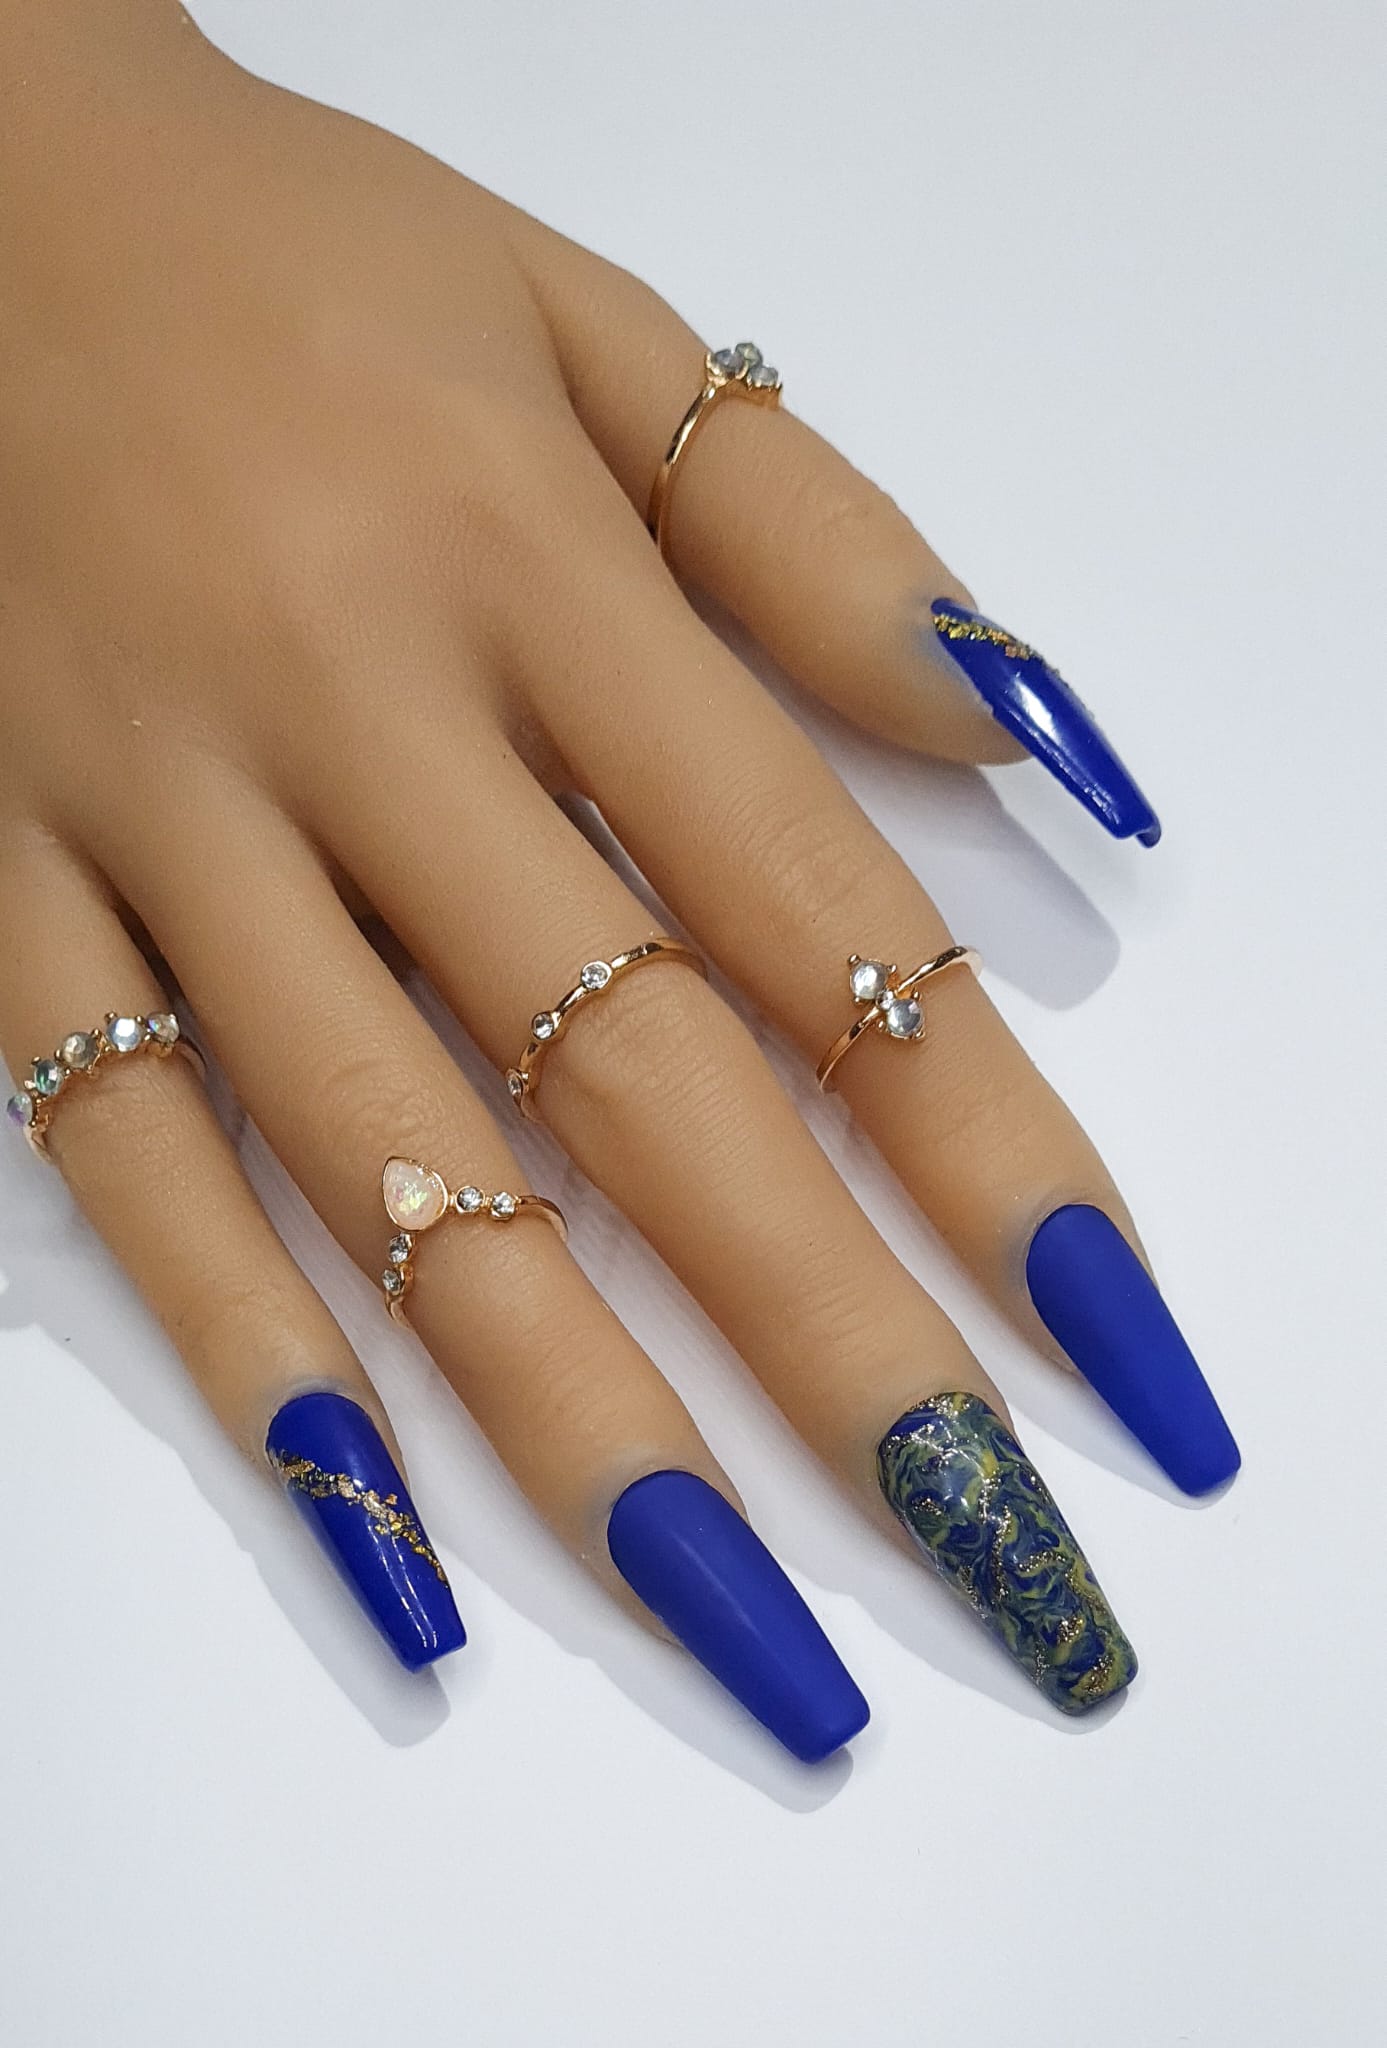 coffin shaped press on nails royal blue marble gold foil matte gloss Glitter Spring Summer Collection full cover gel tip luxury false nails salon quality hand painted custom made uk